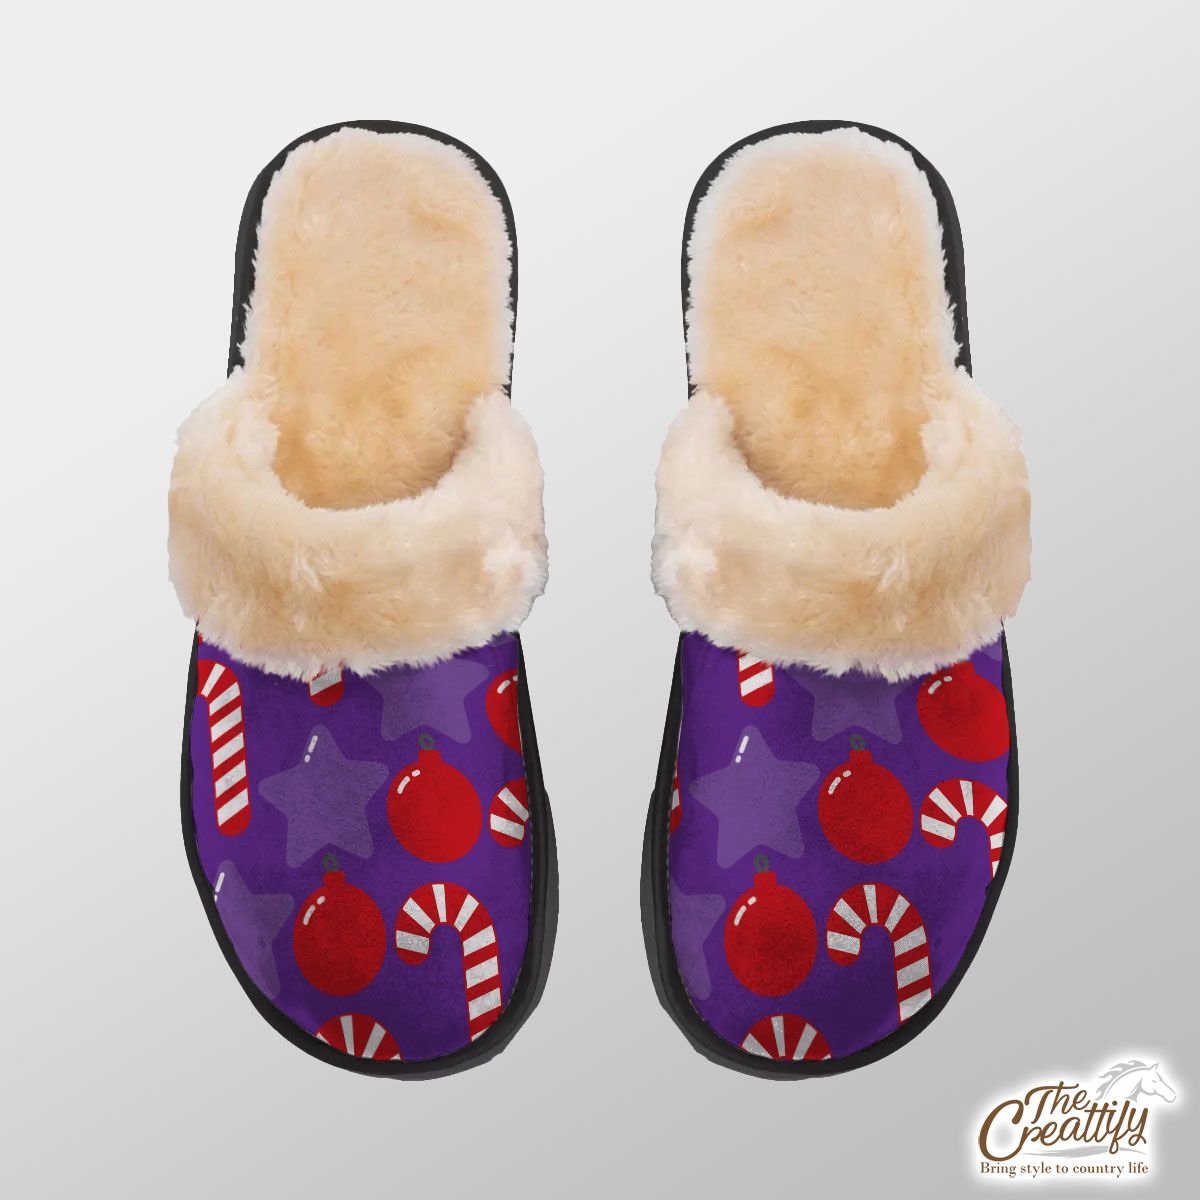 Candy Canes, Christmas Star, Christmas Balls Home Plush Slippers